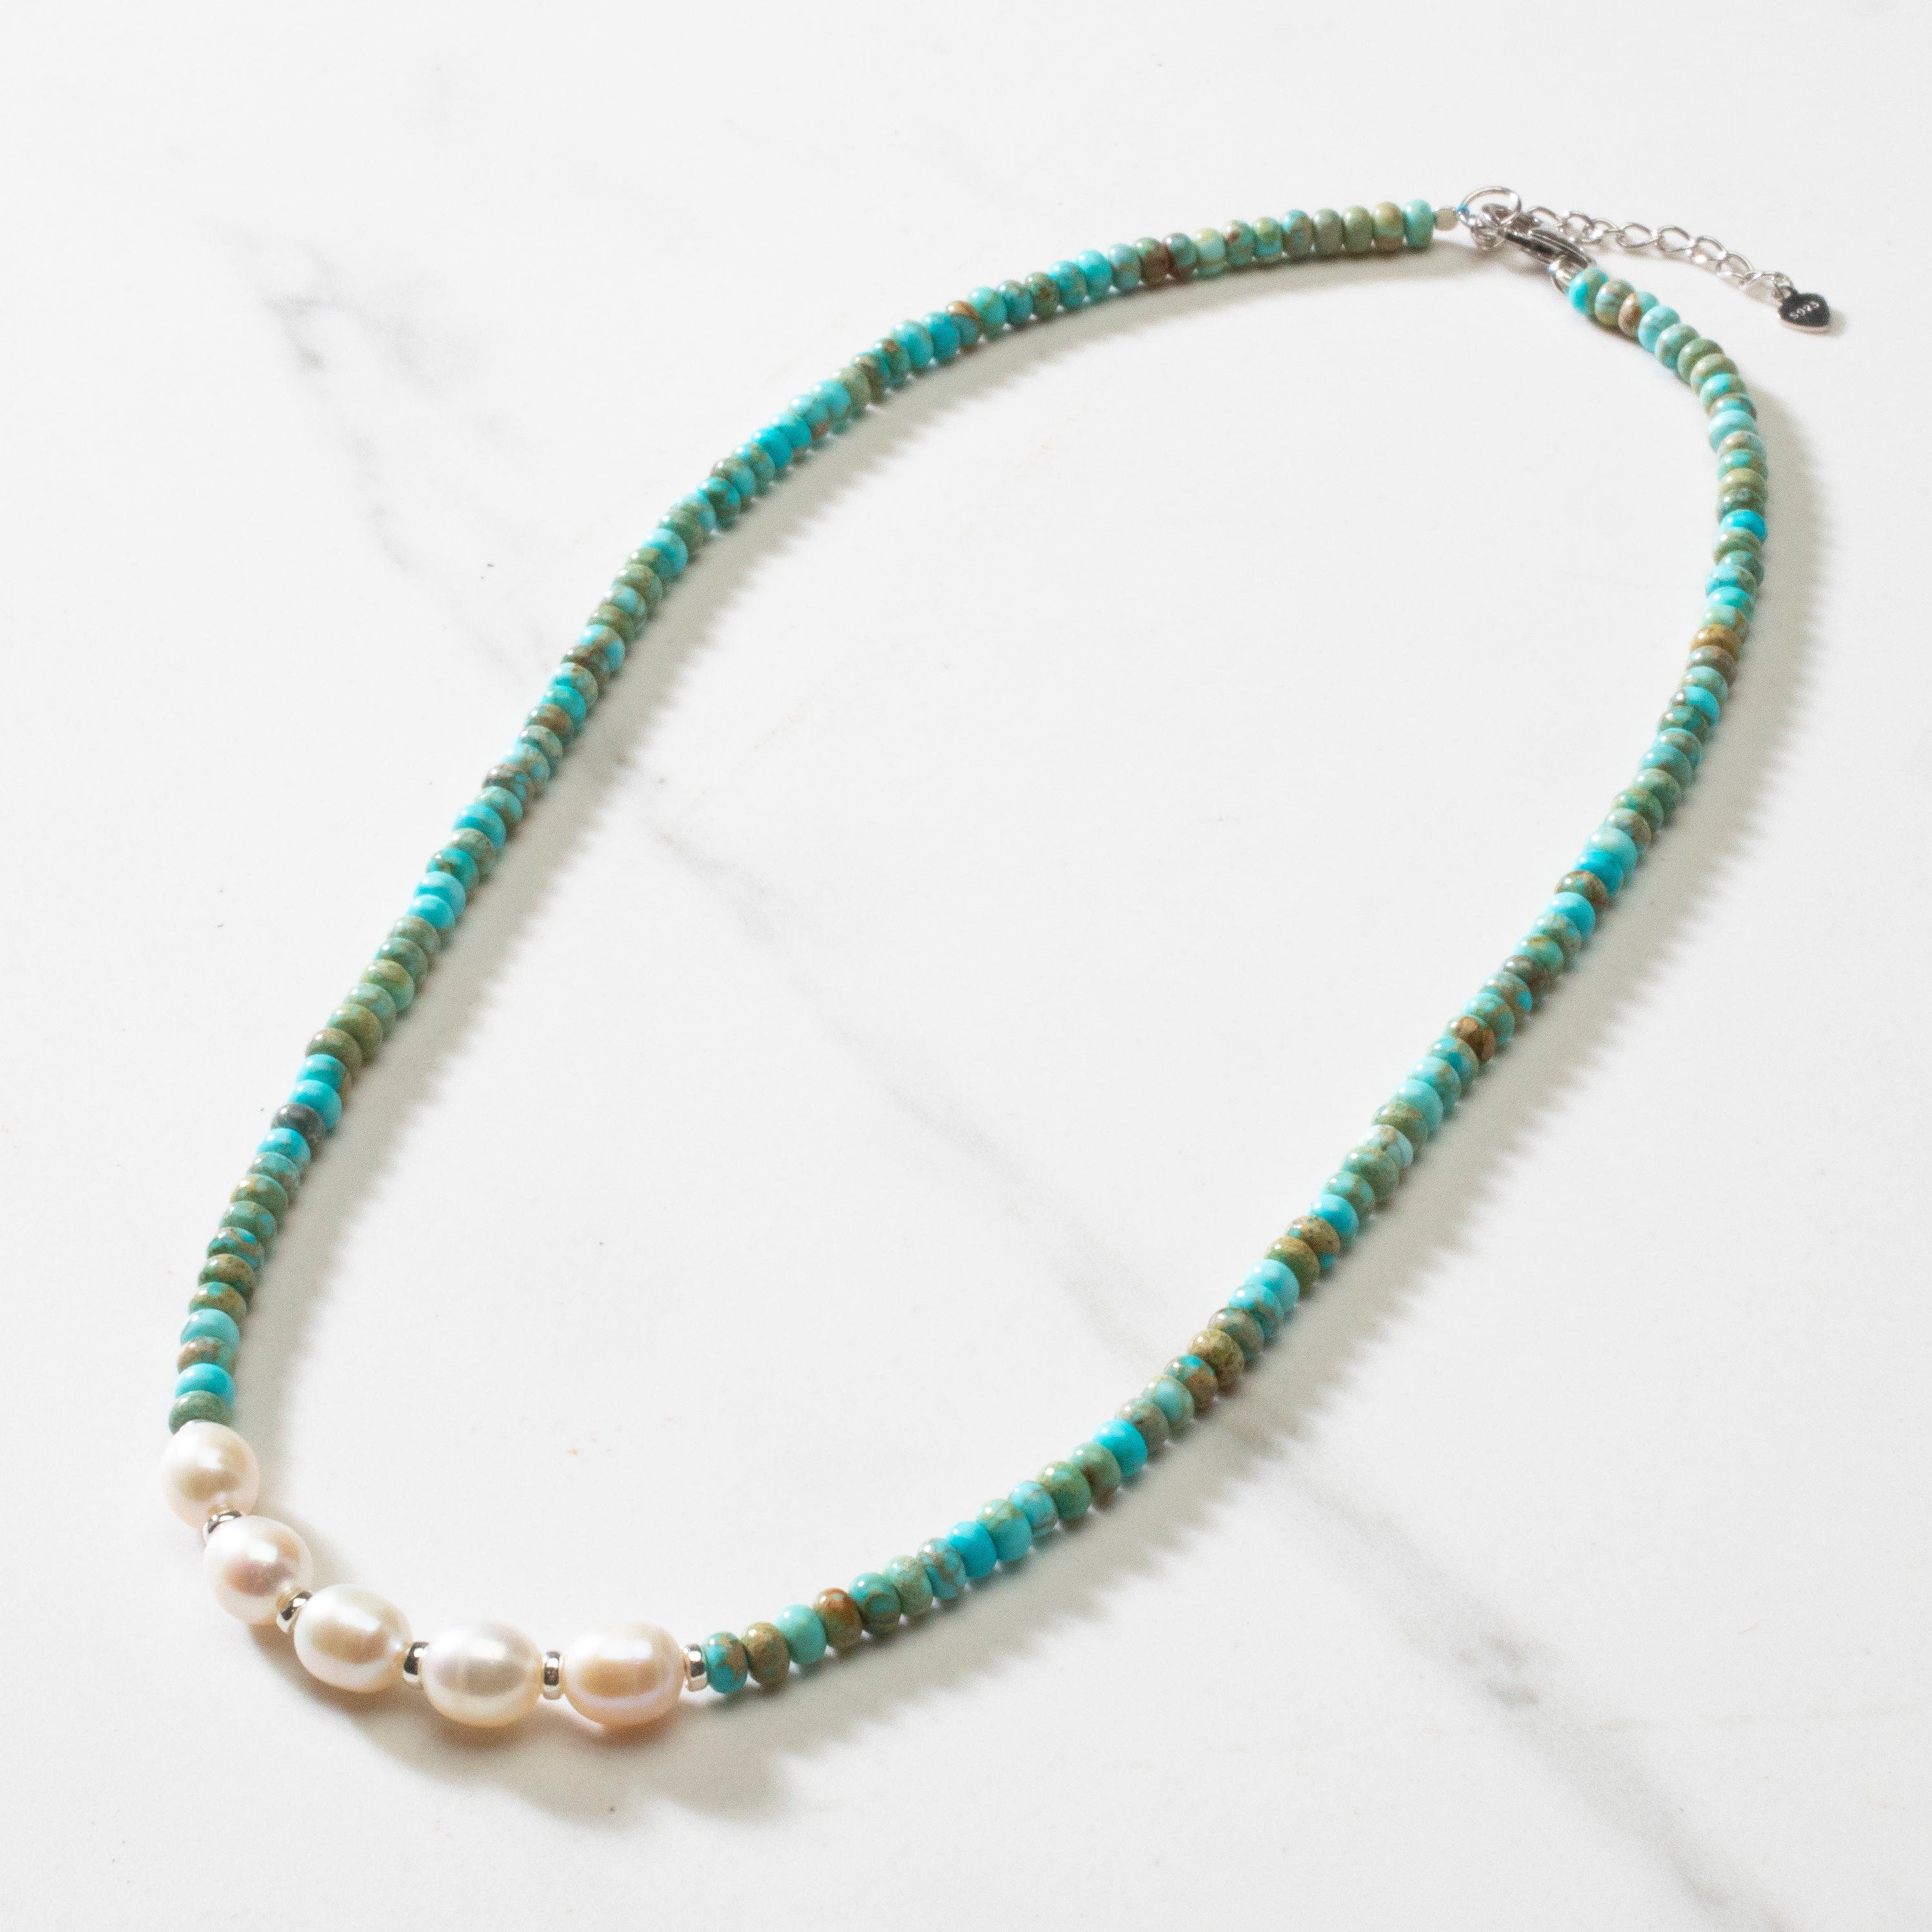 KALIFANO Jewelry 4mm Faceted King Howlite Turquoise Bead Necklace with 5 Pearls with 925 Silver Clasp 4MKT